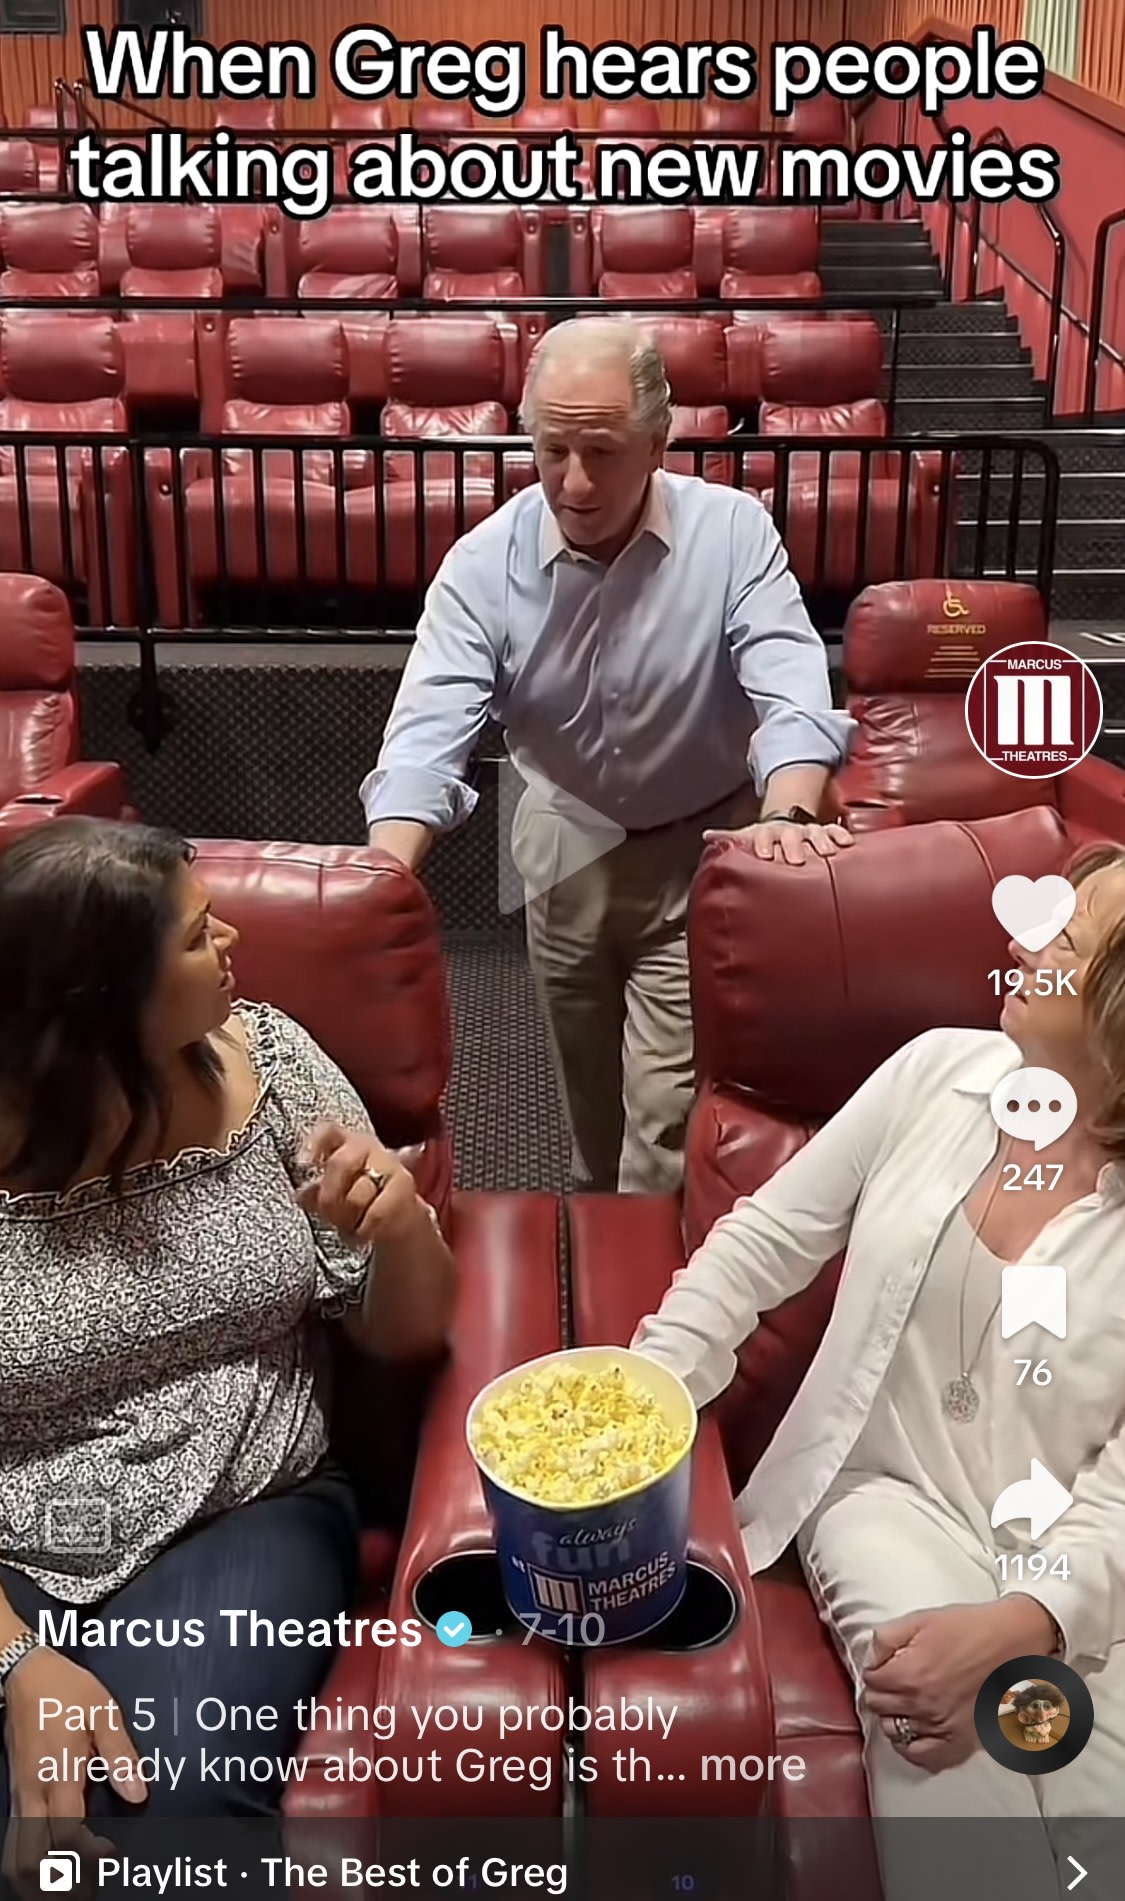 TikTok video screenshot of CEO Greg chatting with customers at Marcus Theatres